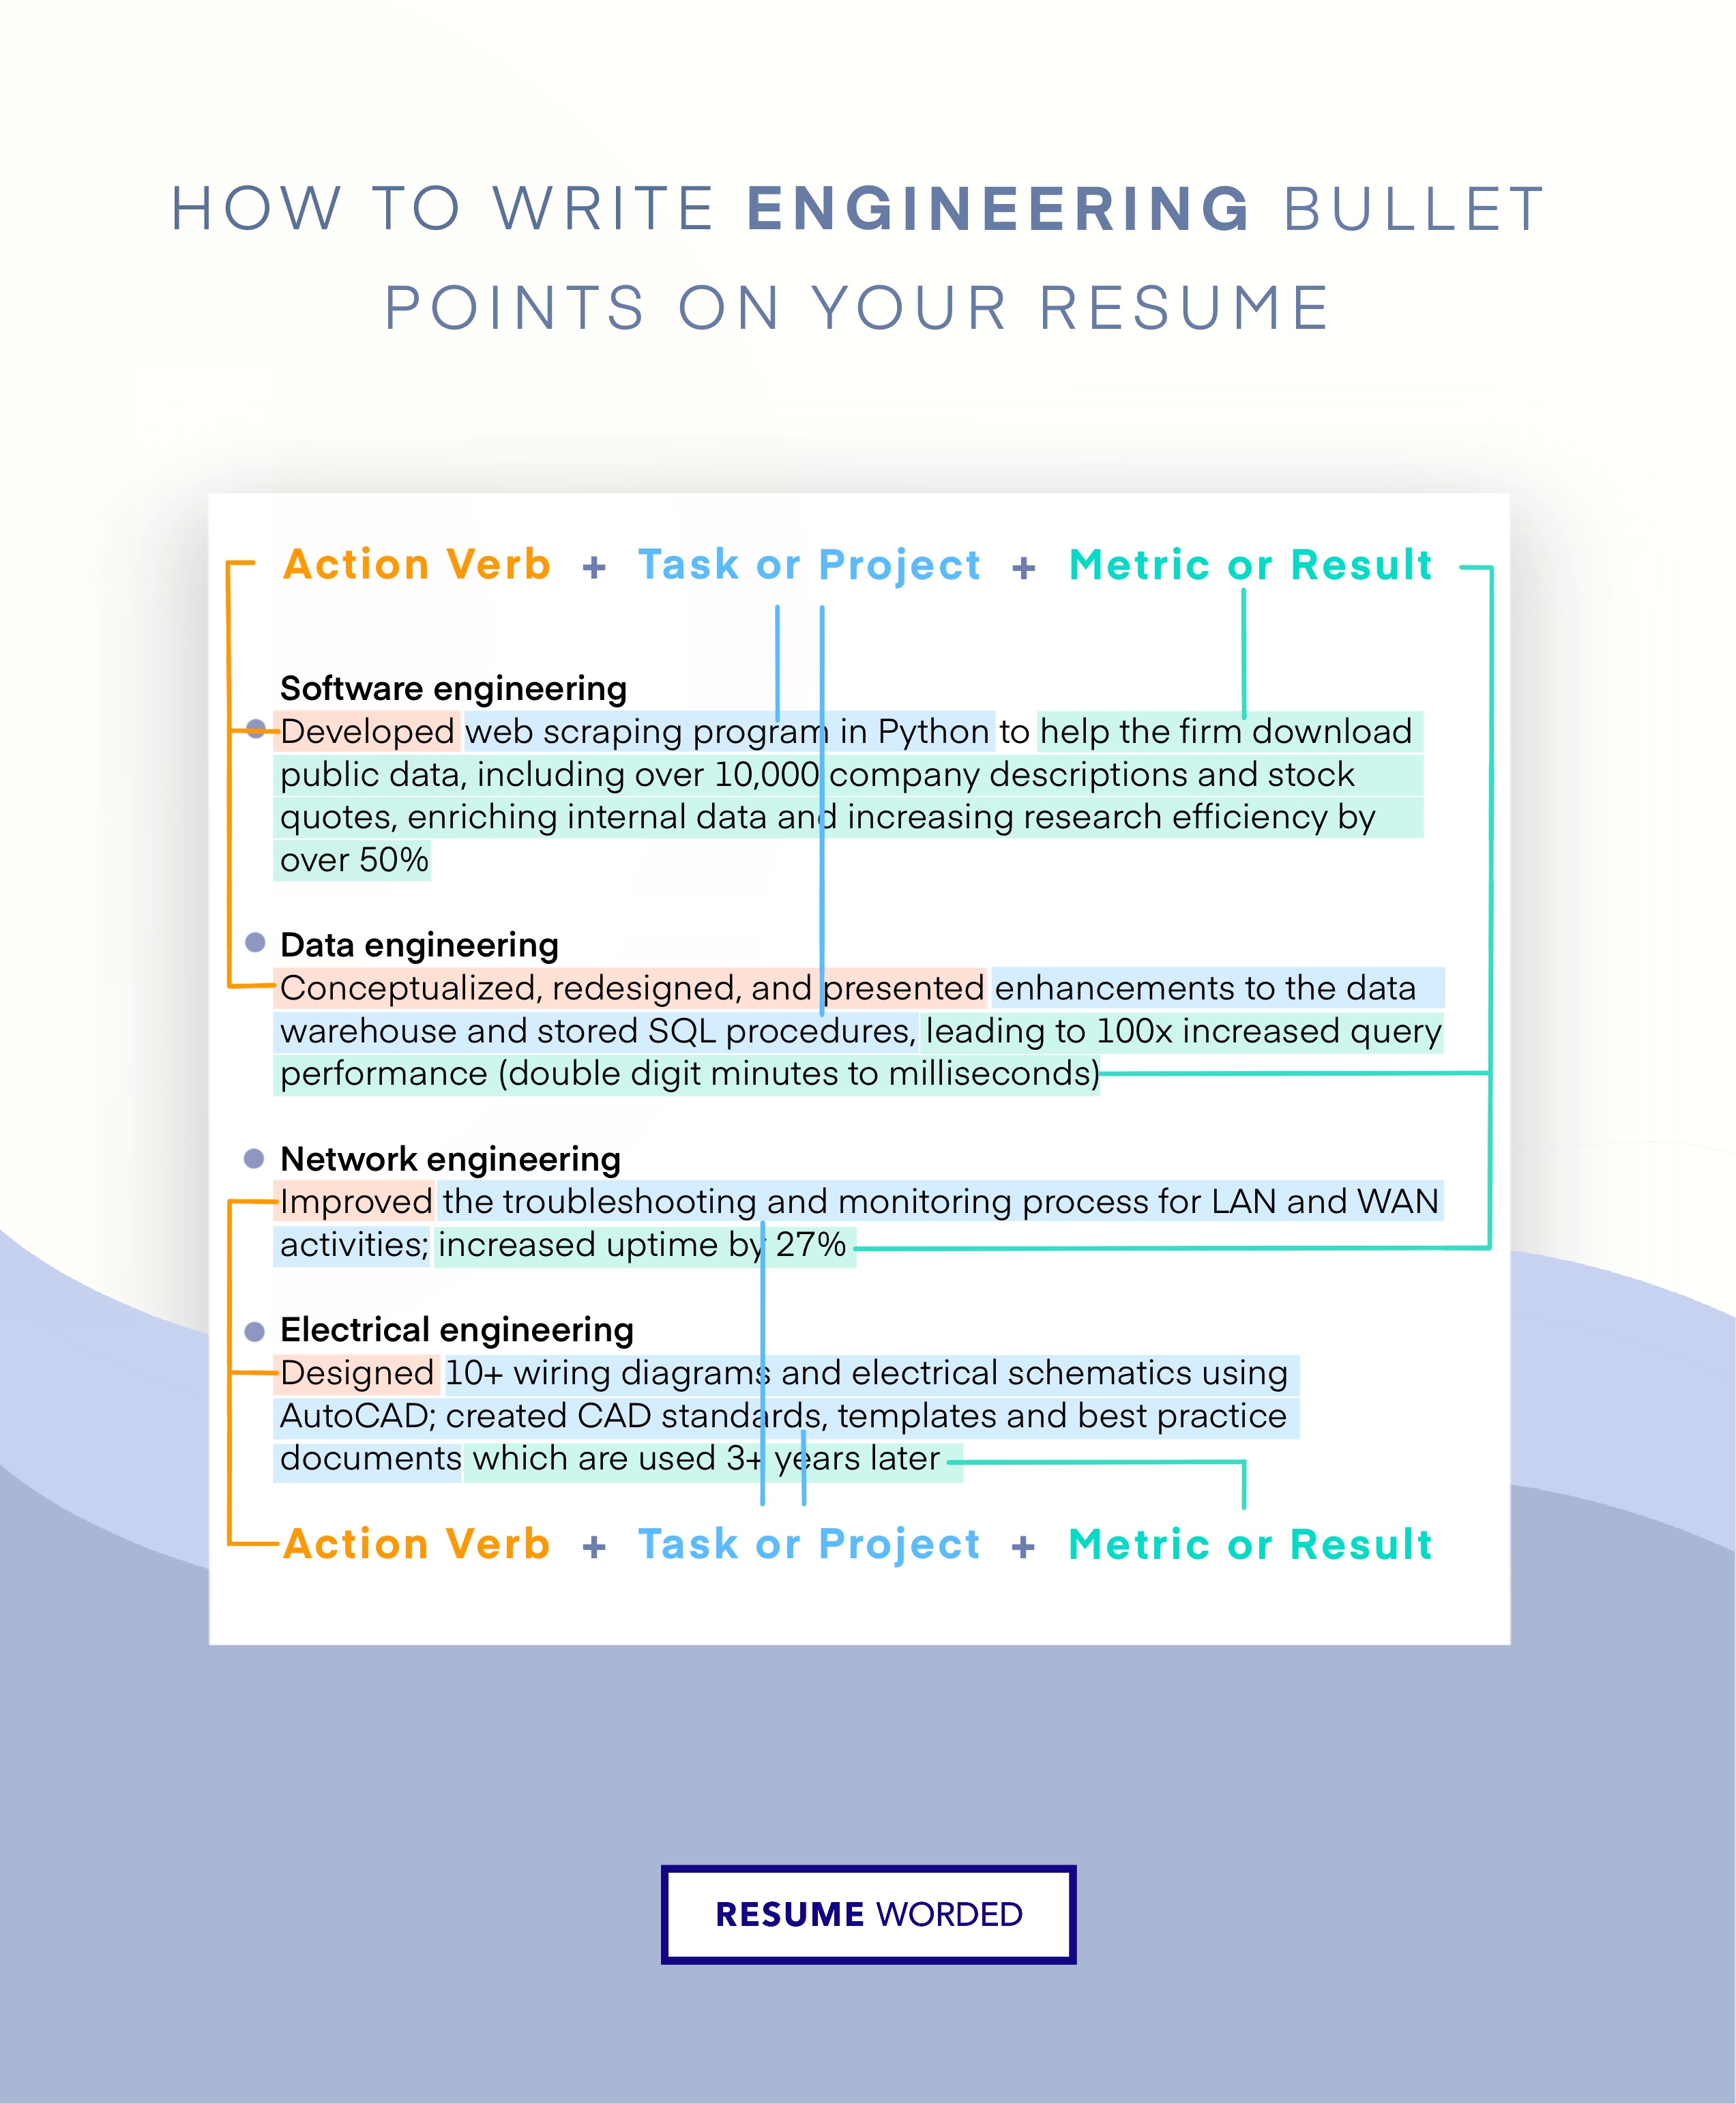 Skills section calls out relevant hard skills in mechanical engineering - Mechanical Engineer Resume